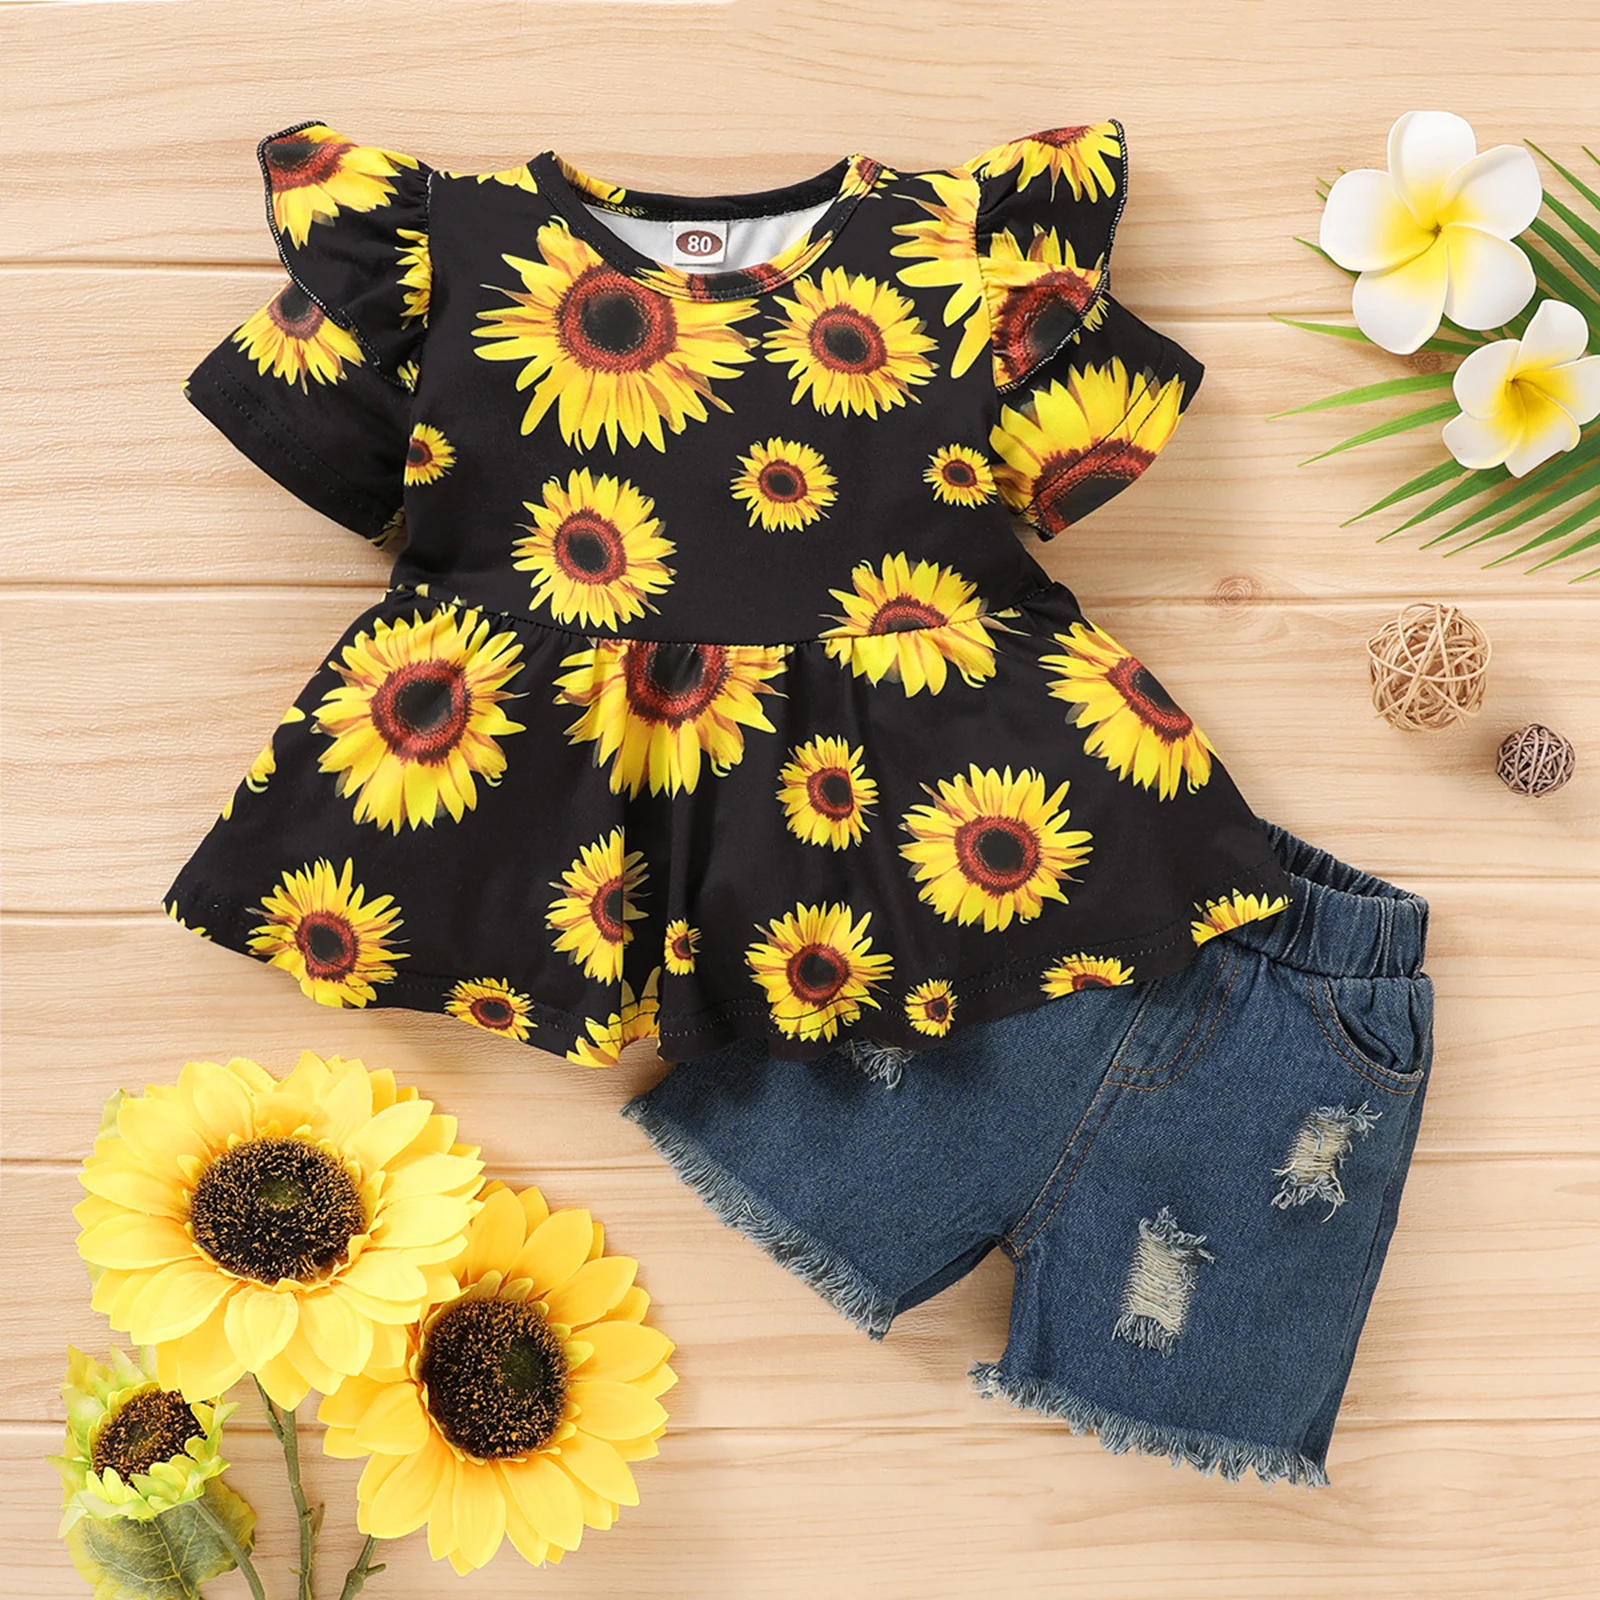 

Girl’s 2Pcs Summer Clothes Suit, Sunflower Printed Ruffled Hem Short Sleeve Tops with Short Ripped Jeans New Style 2021